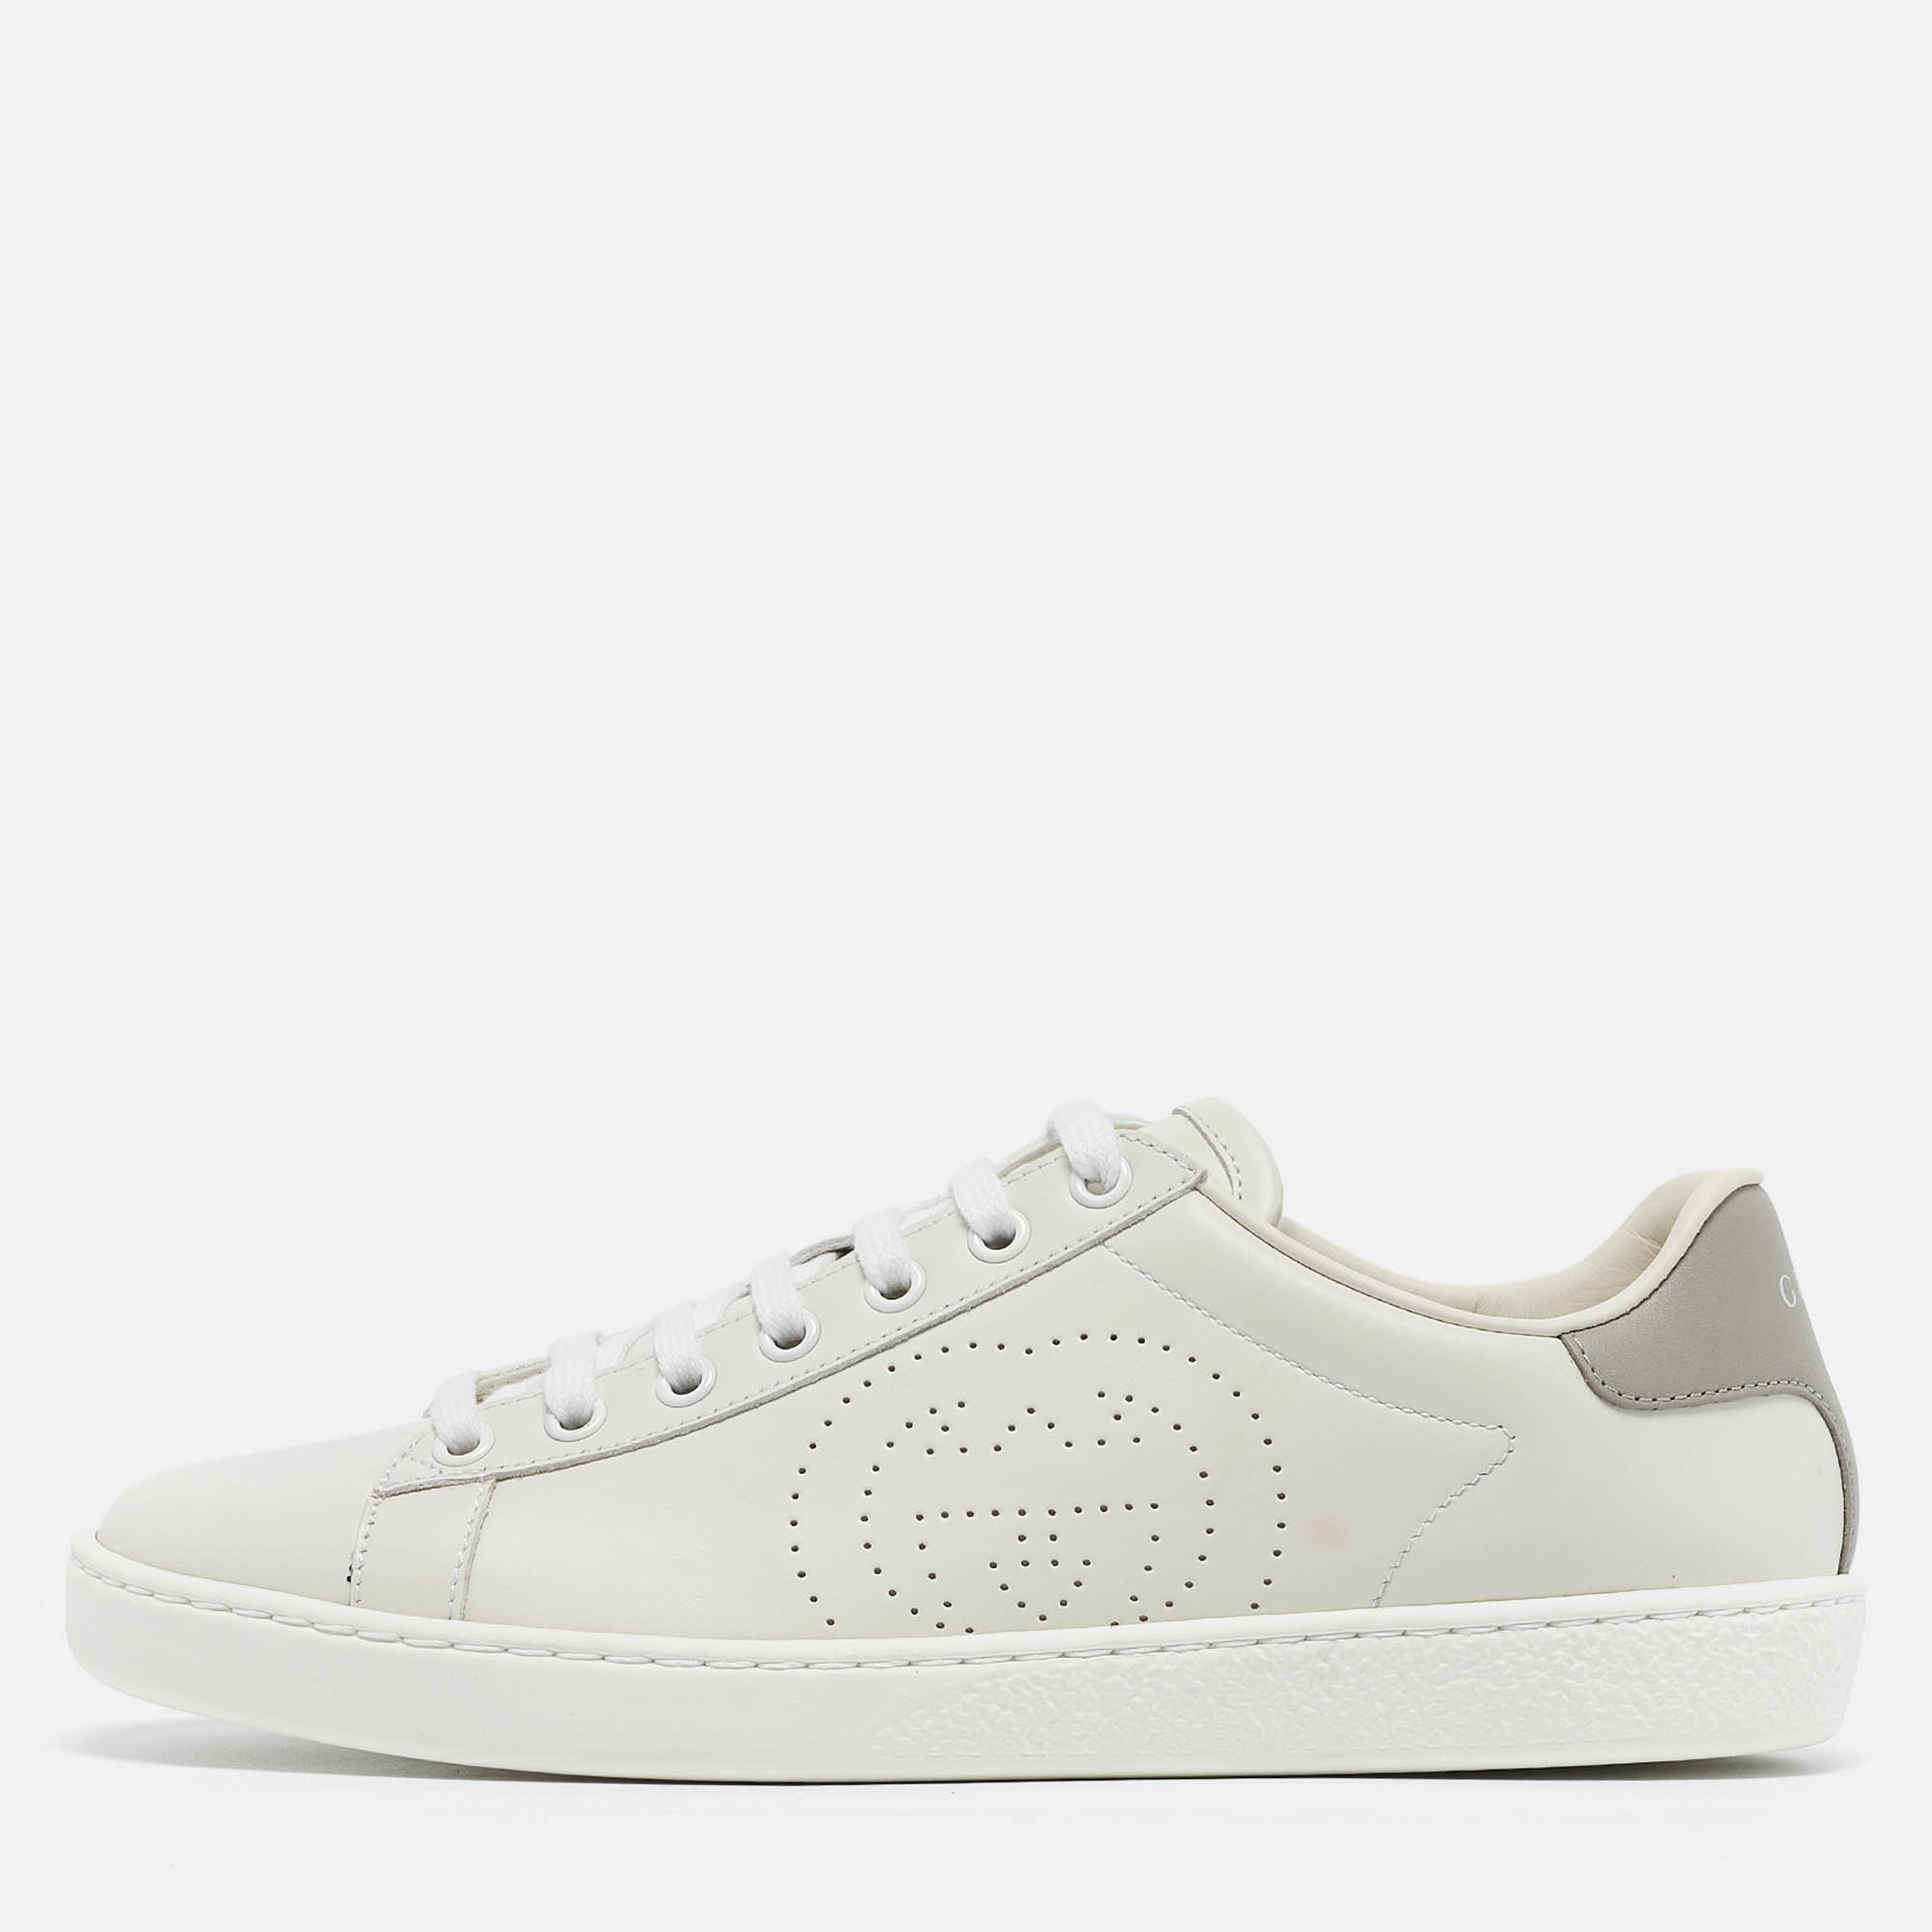 Gucci white perforated interlocking g leather ace sneakers size 38